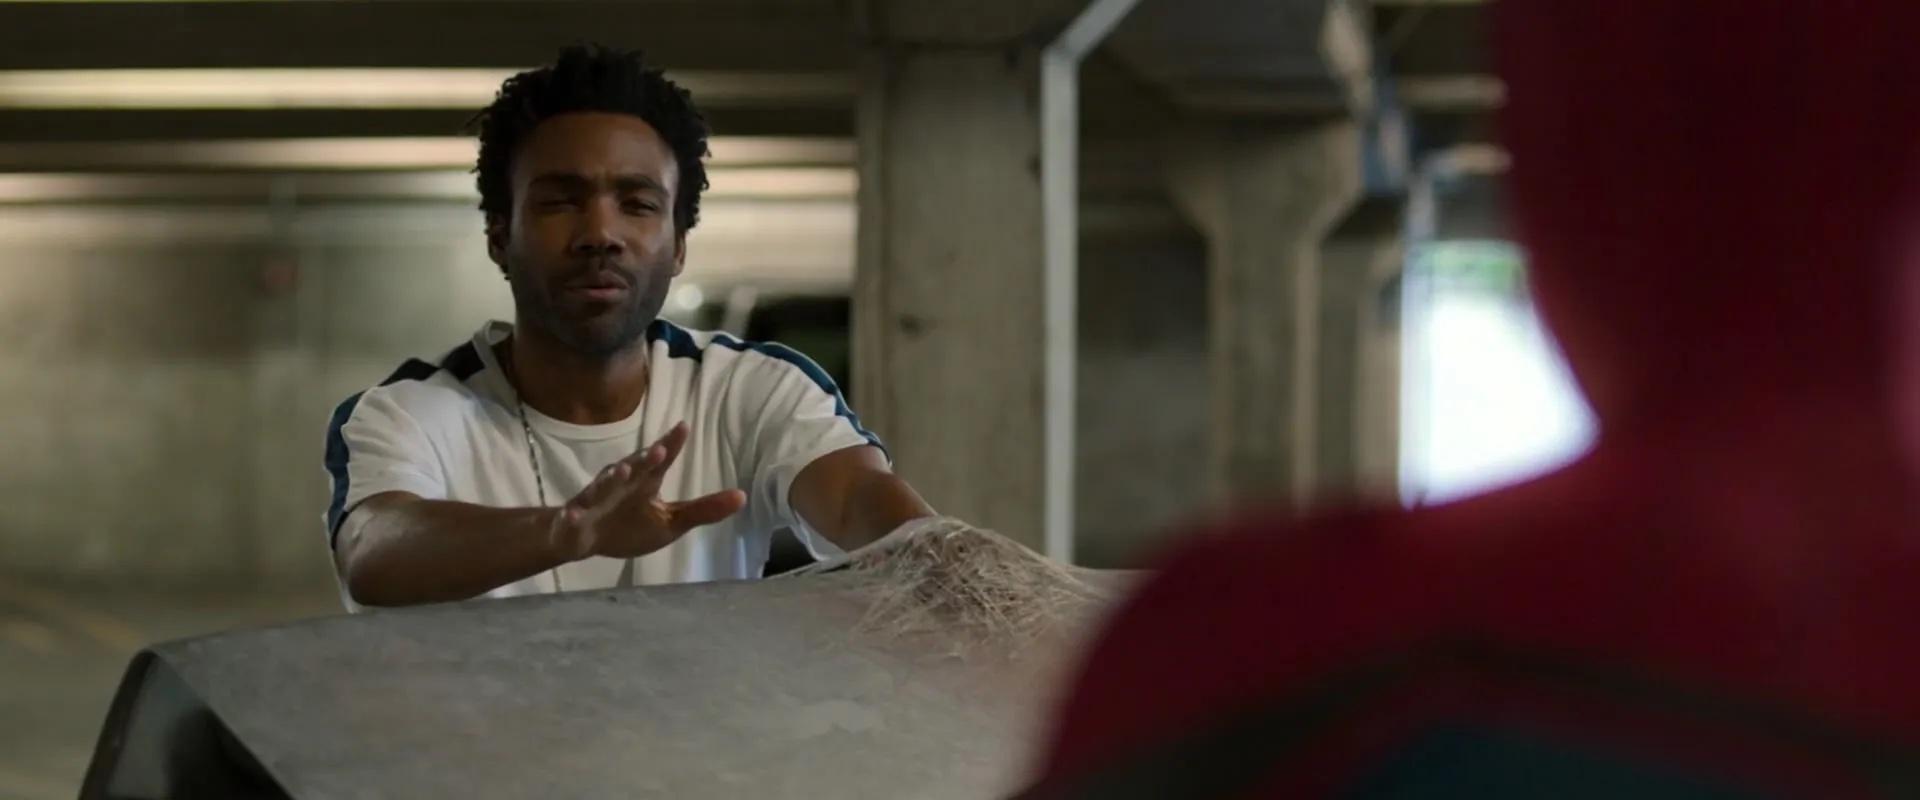 Donald Glover as Aaron Davis in Spider-Man: Homecoming. He’s got one hand webbed to the top of a car’s trunk; Spider-Man appears blurrily in the foreground.